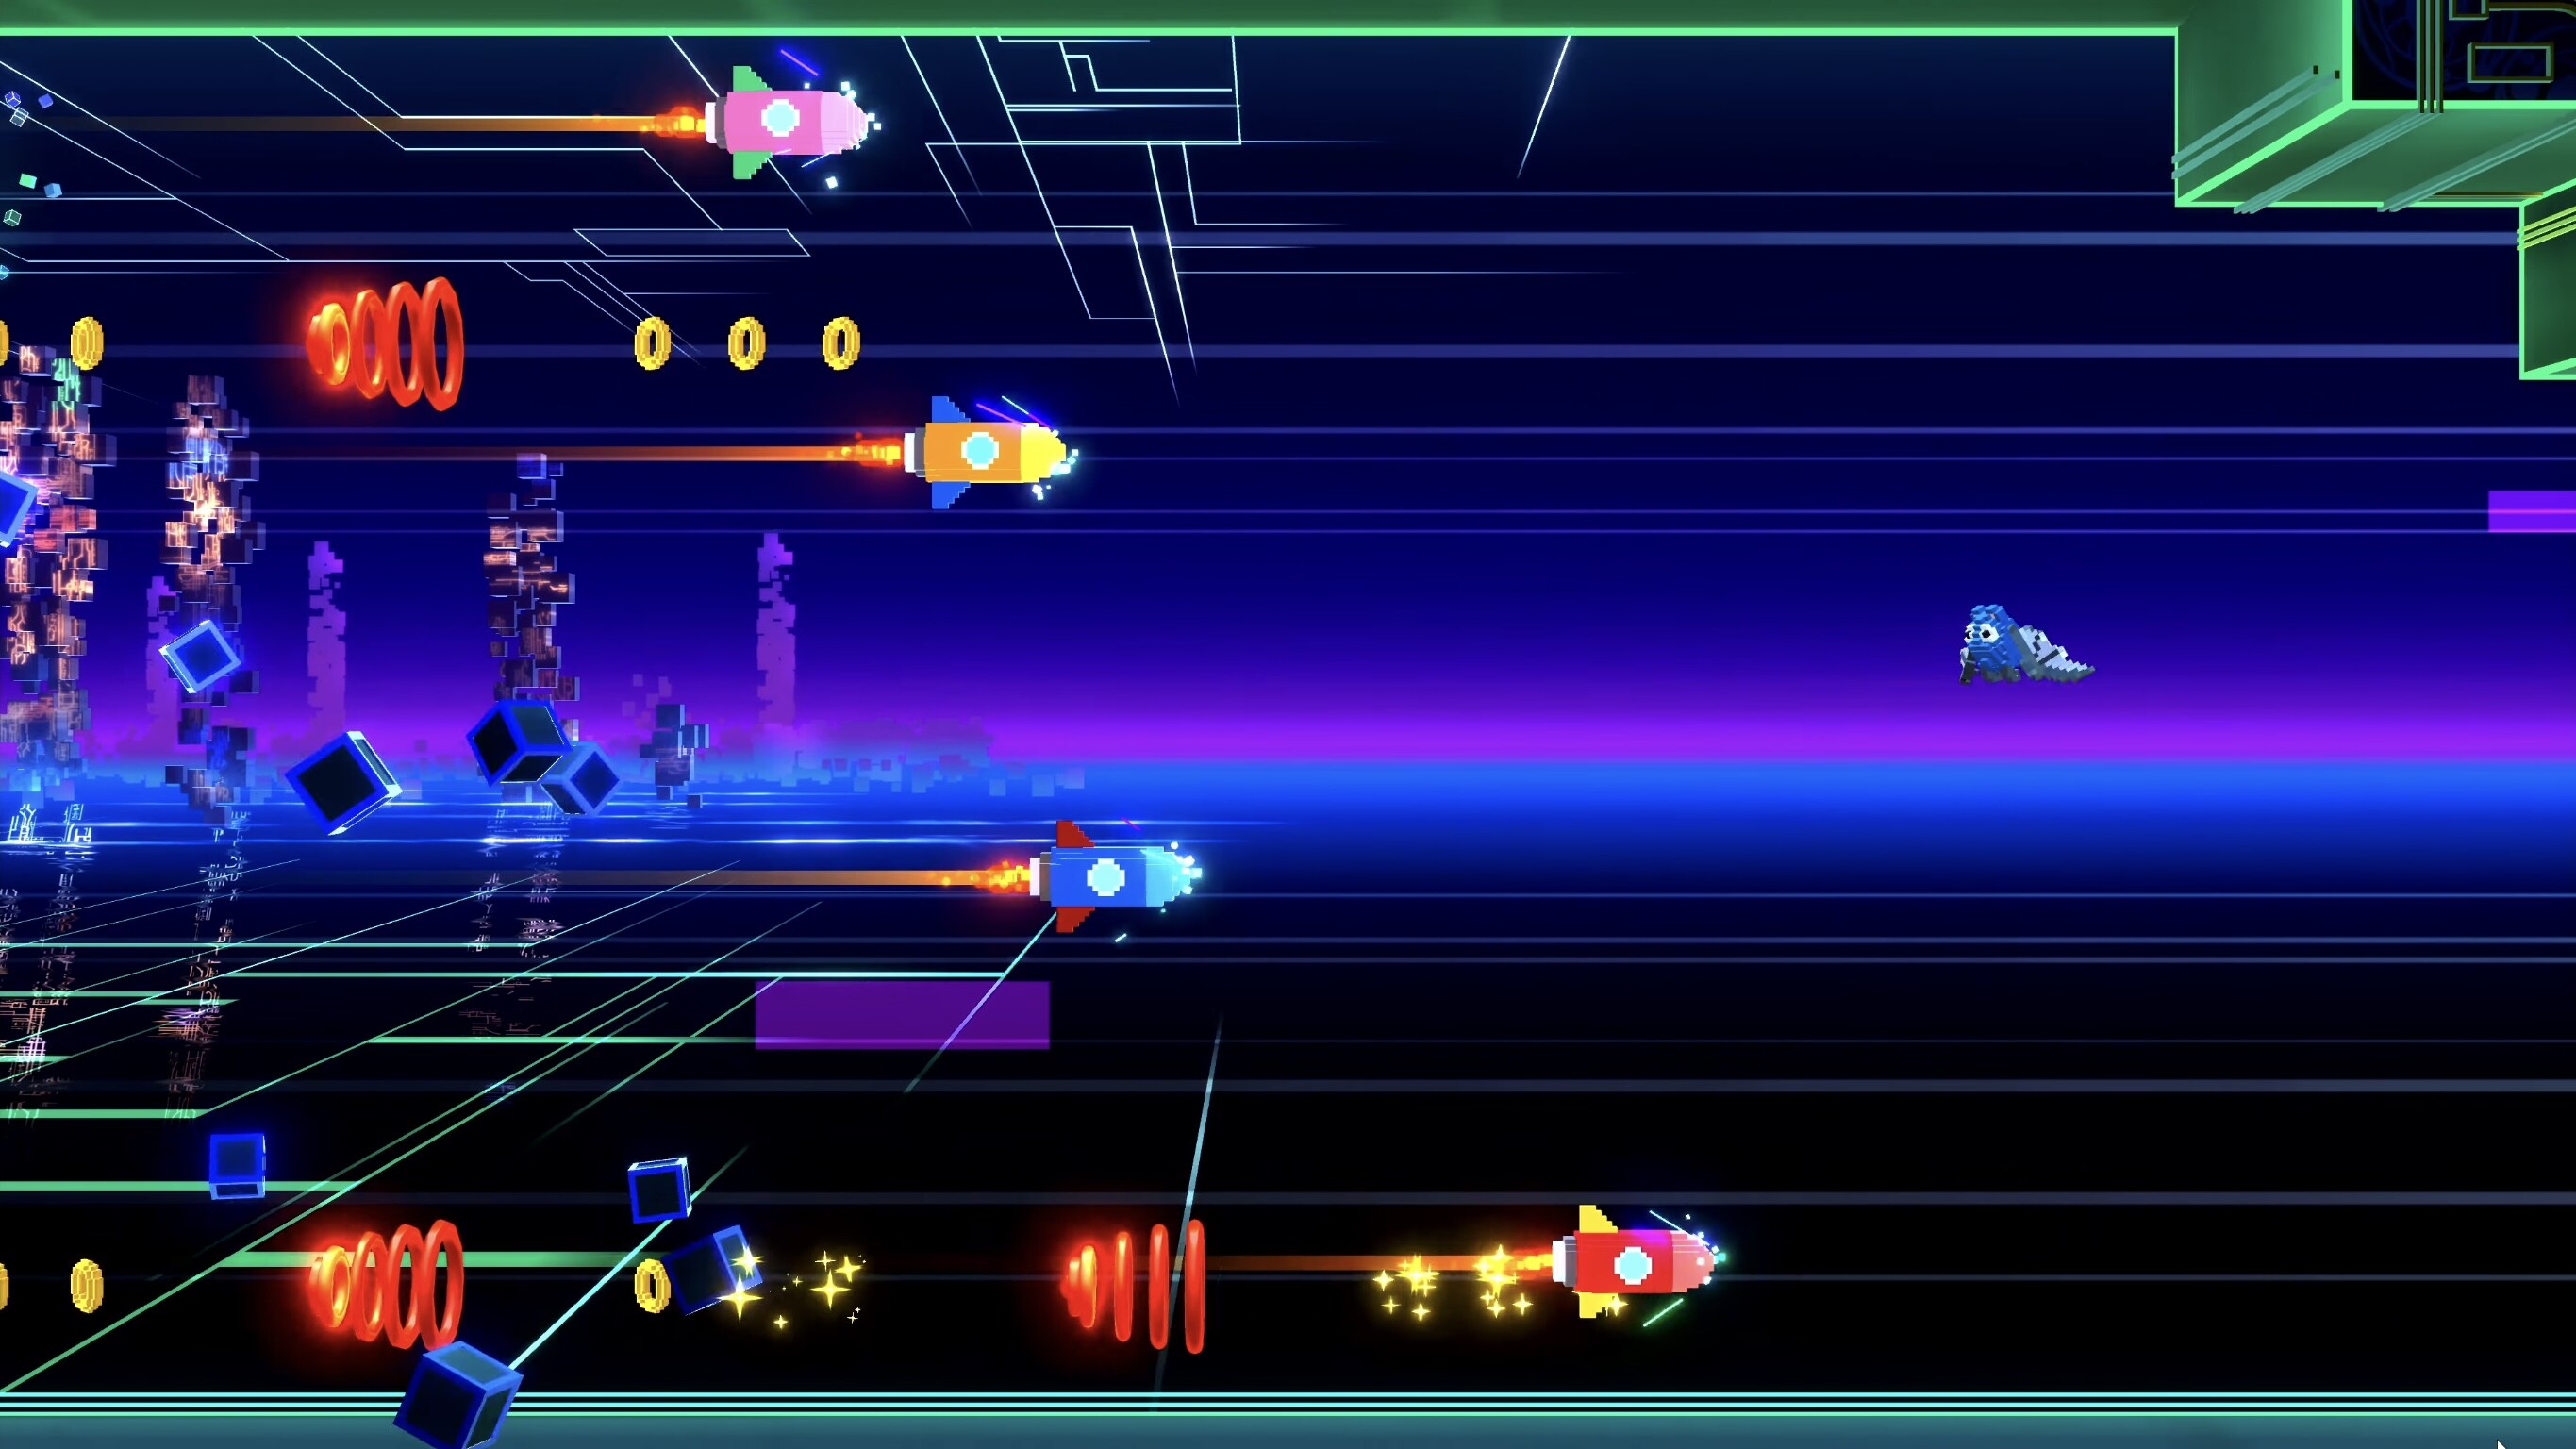 Sonic Superstars Will Launch On October 17, 2023 – NintendoSoup